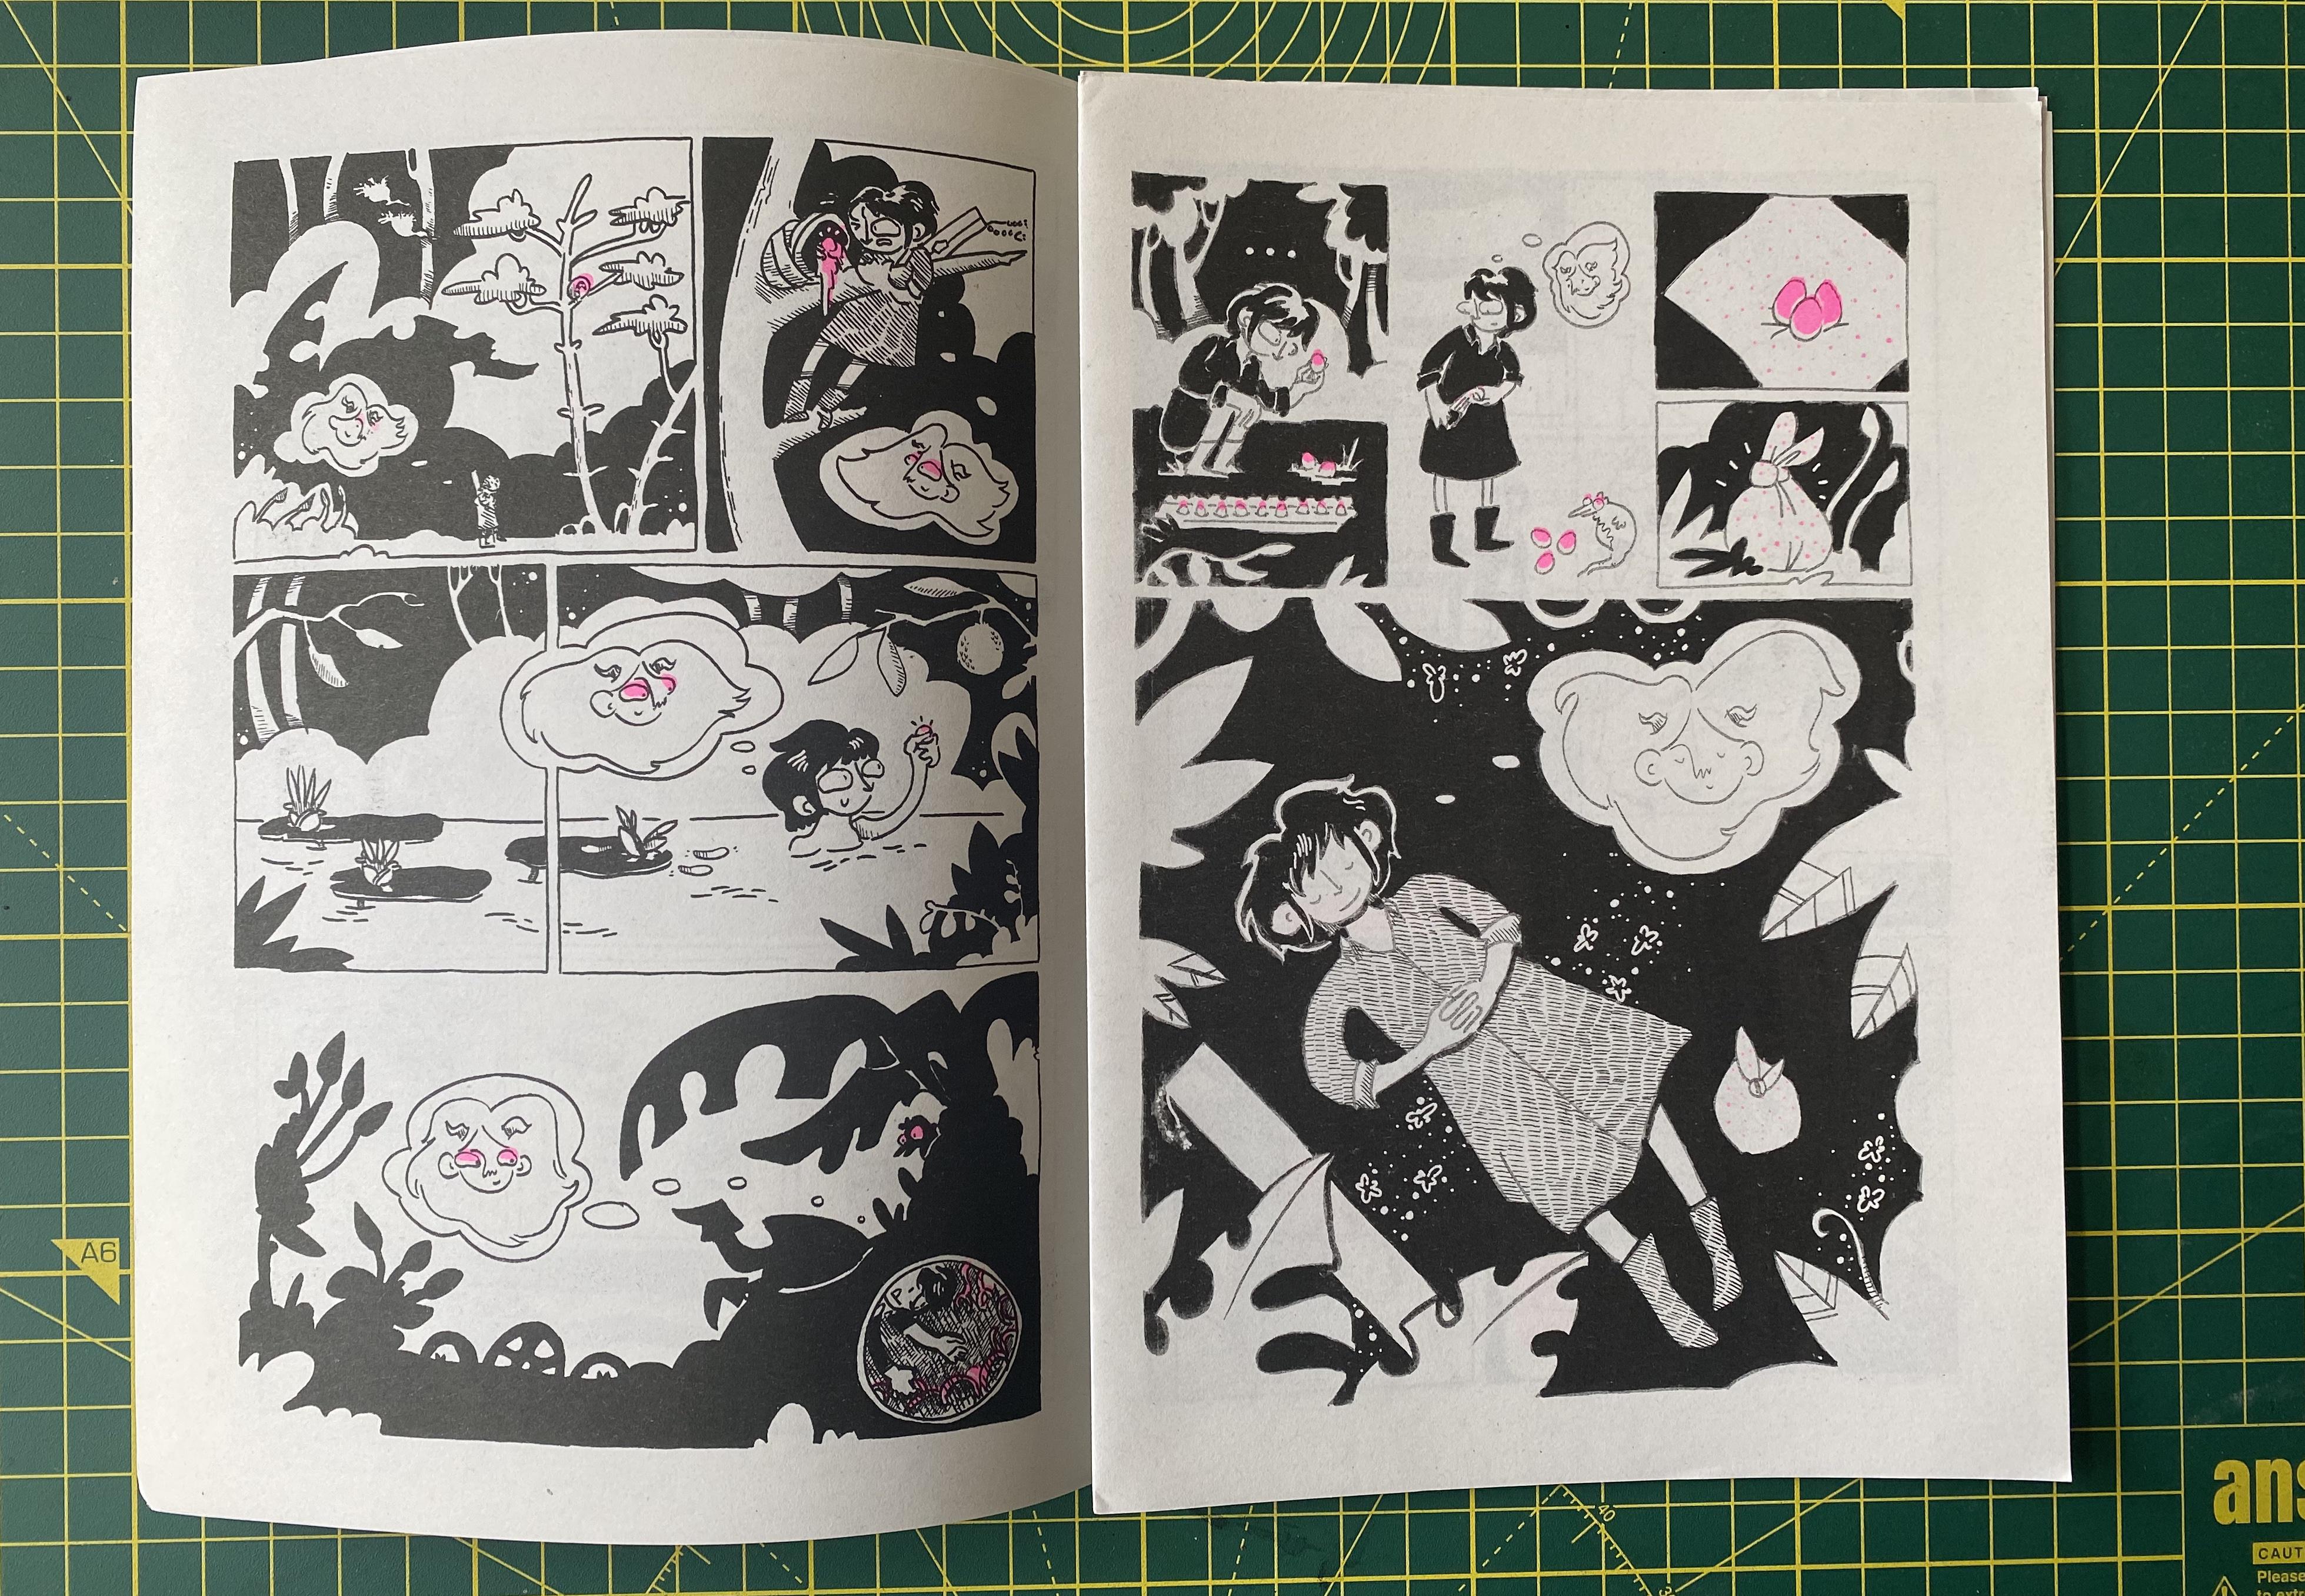 A spread from Crushing by Kristen Haas Curtis